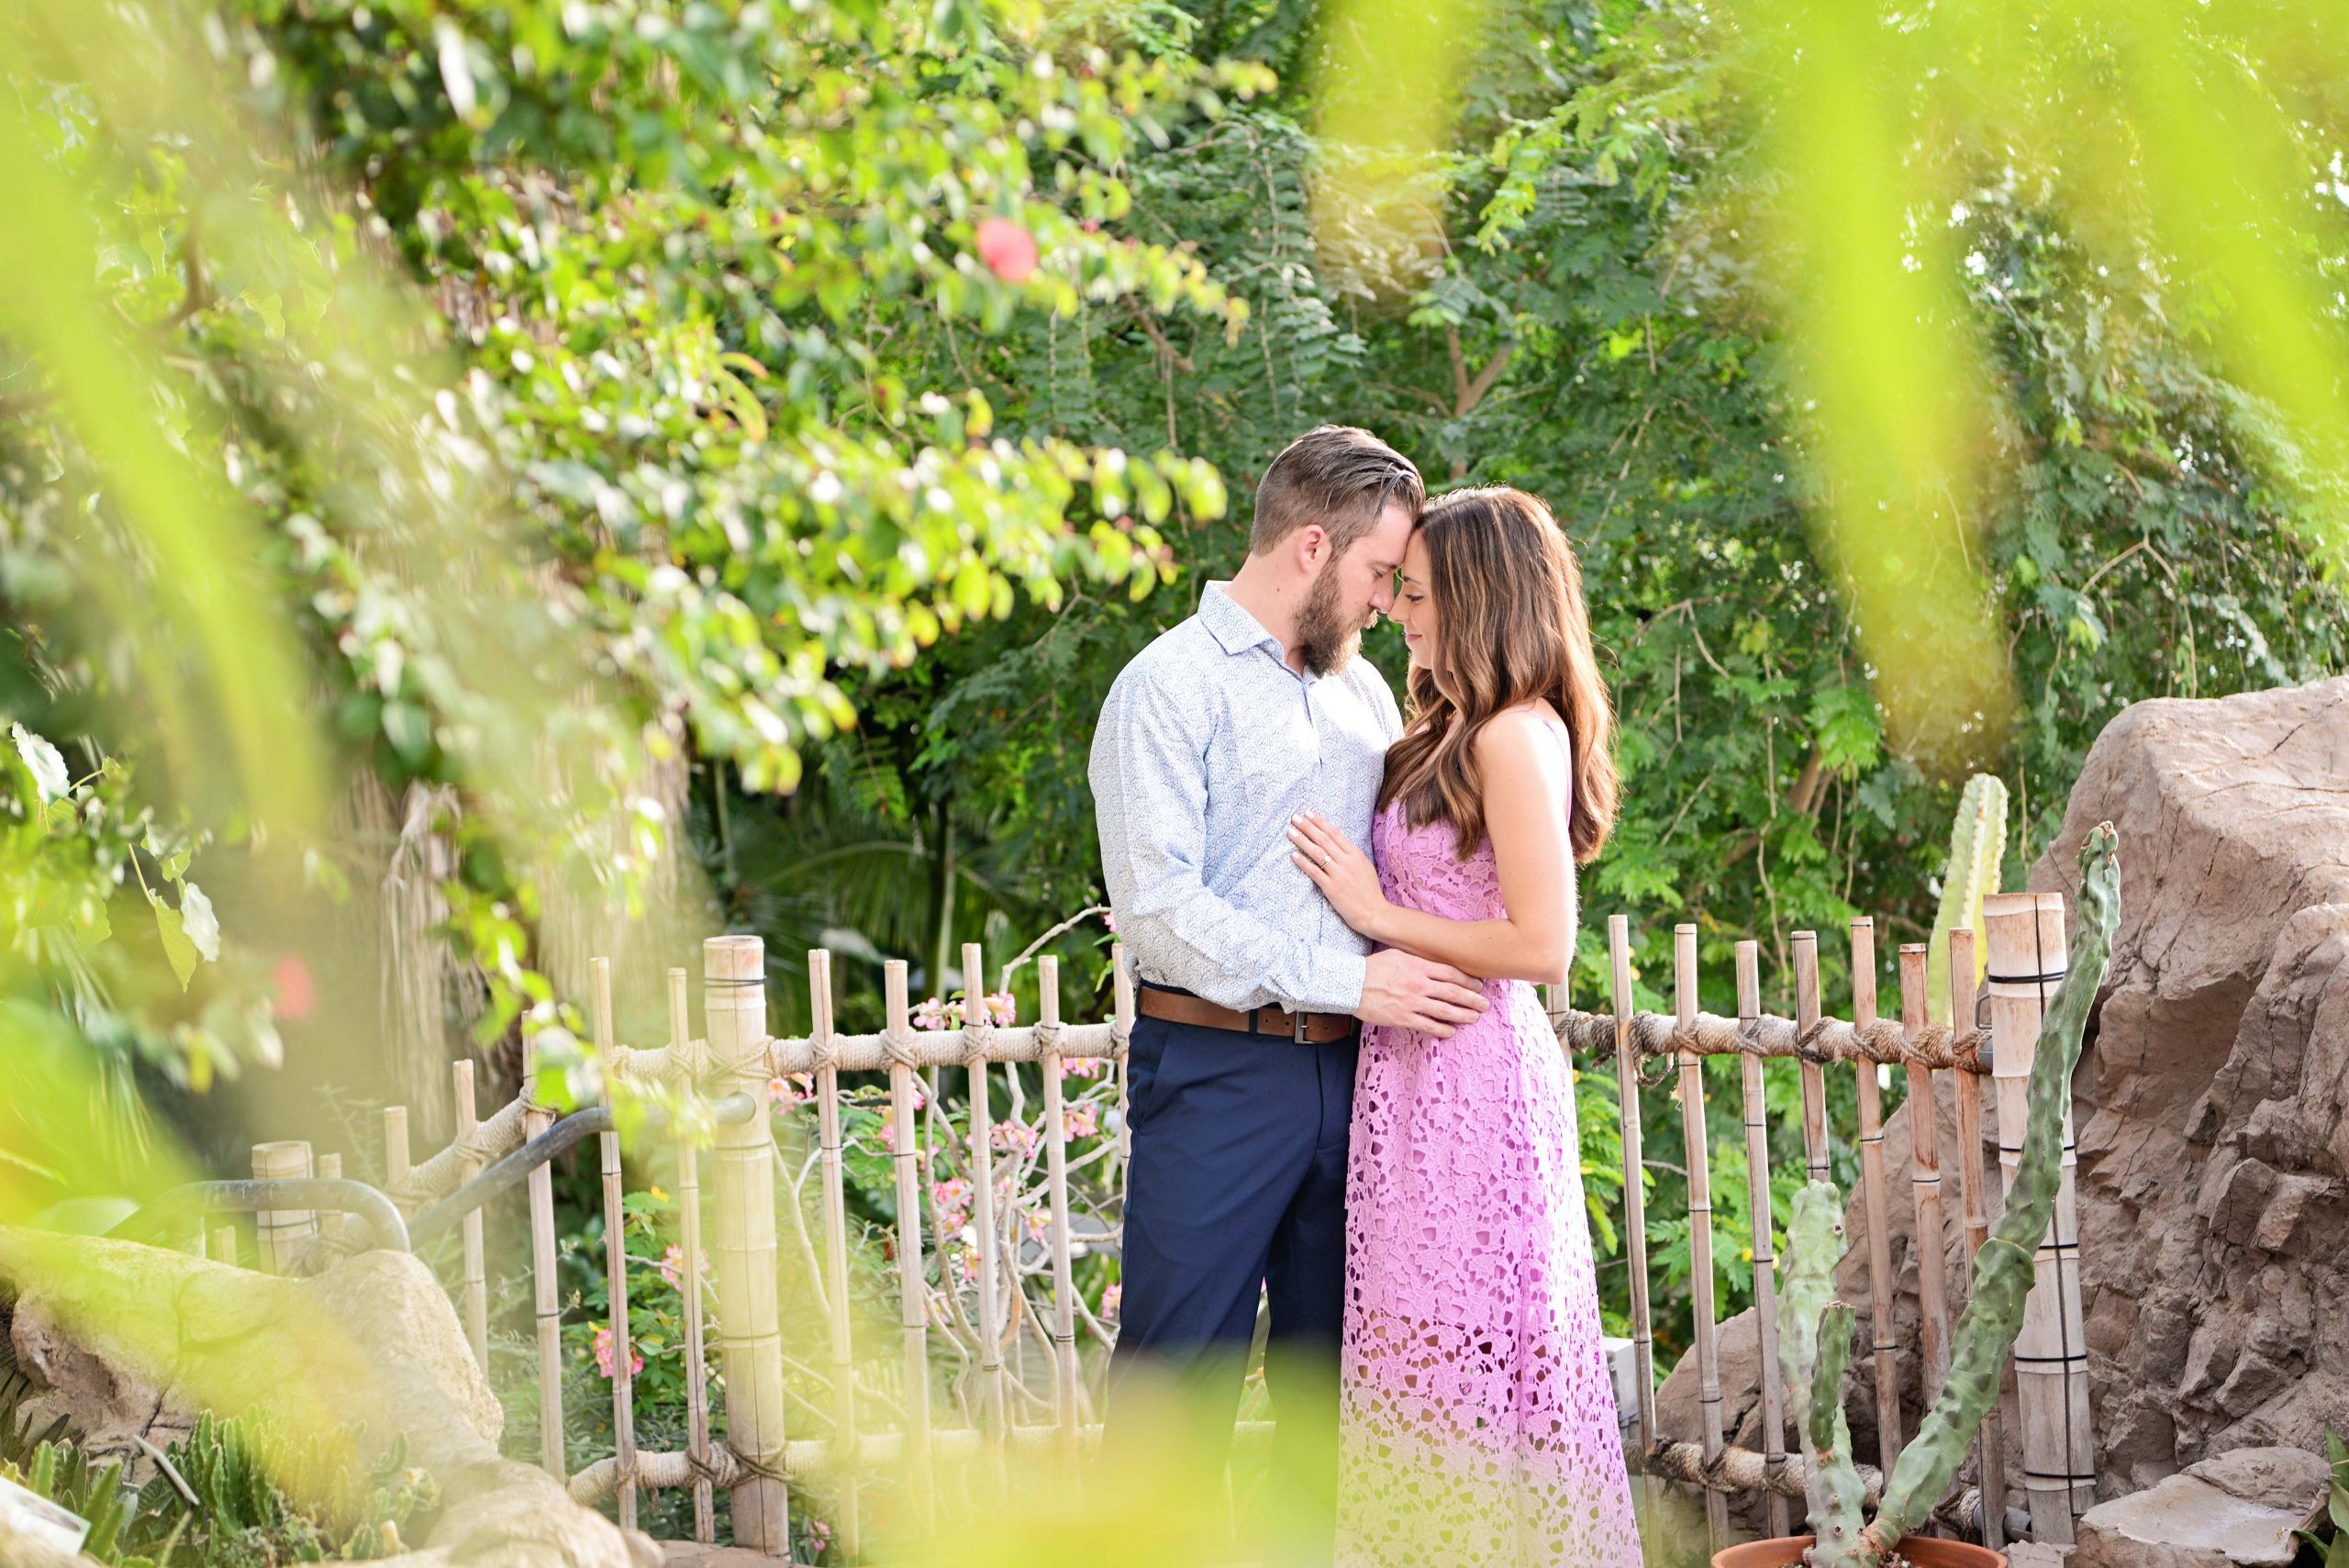 Spring Love Session at the Myriad Botanical Gardens